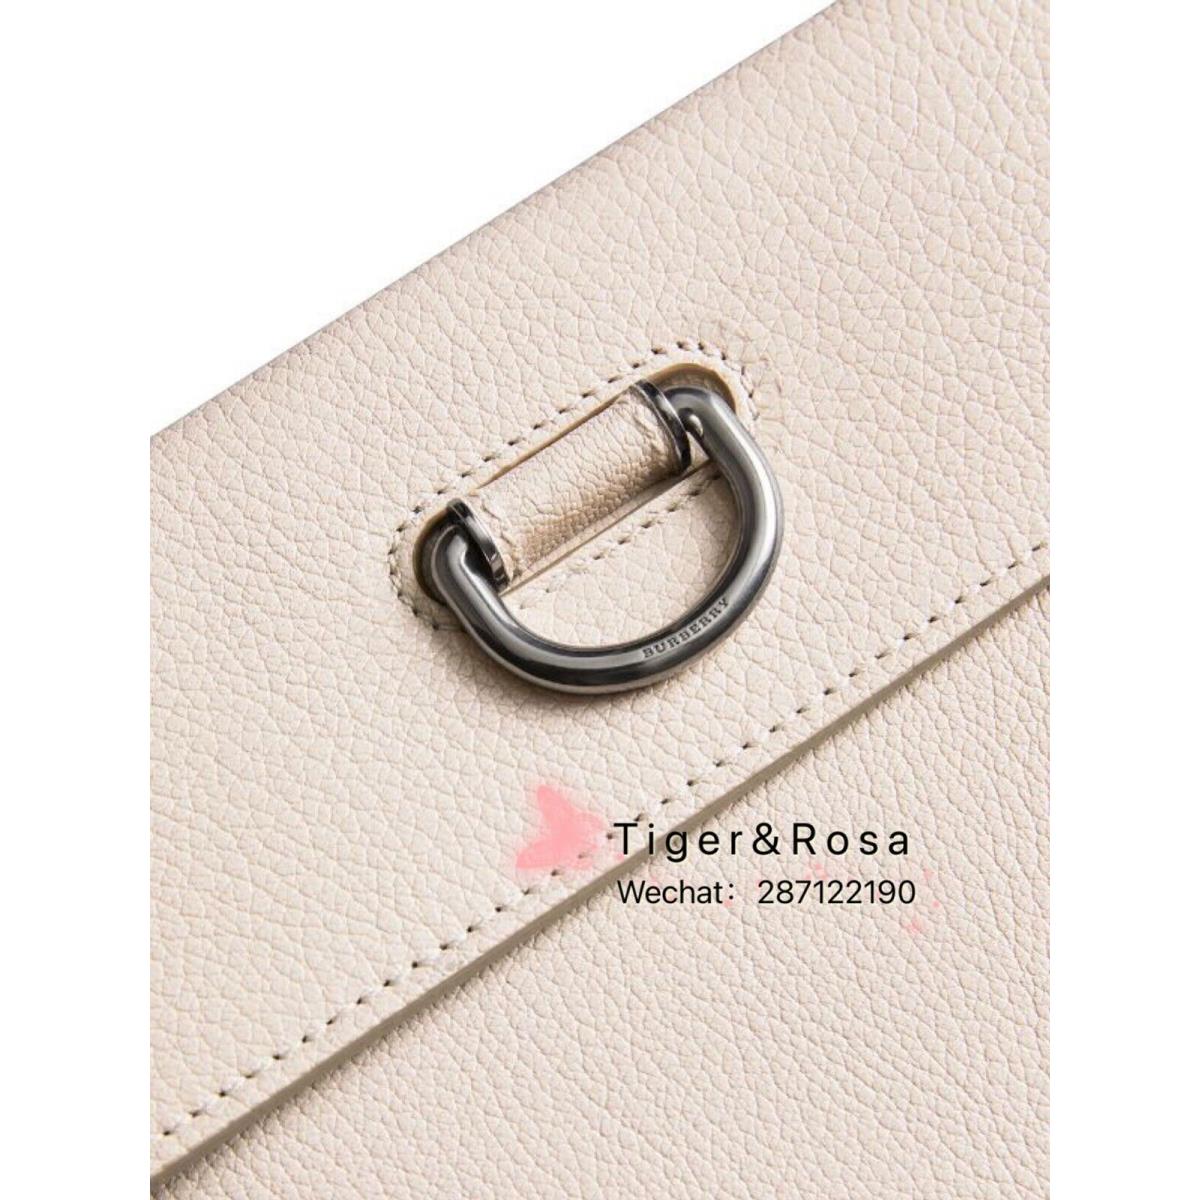 Burberry D Ring Leather Pouch with Zip Coin Case with dustbag$790